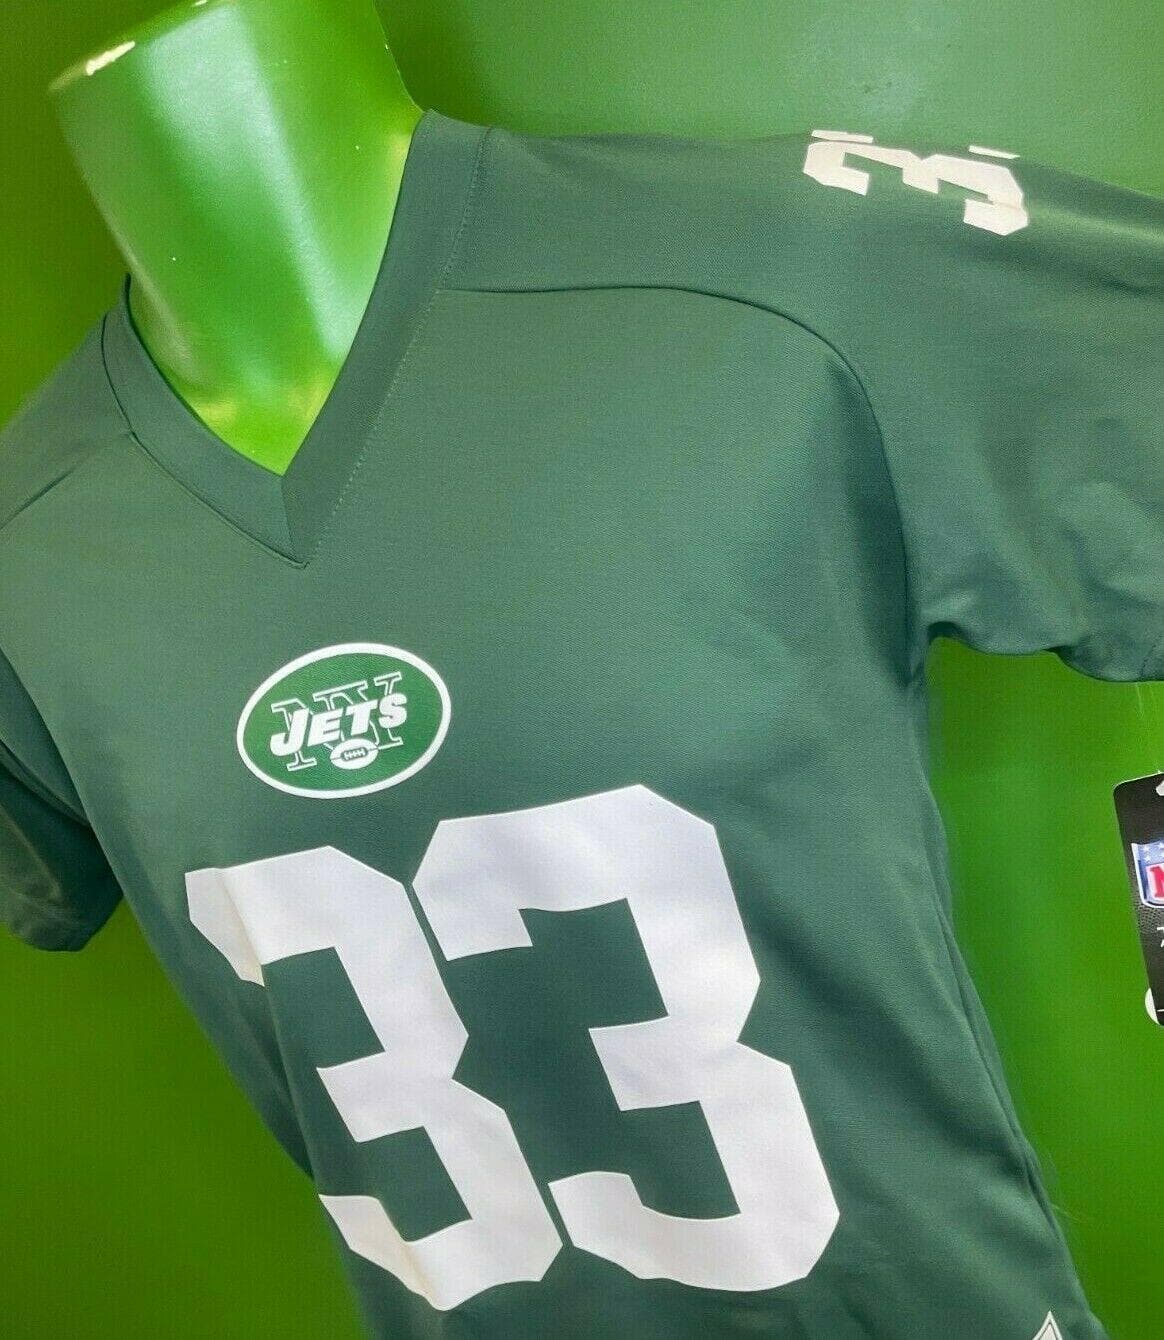 NFL New York Jets Jamal Adams #33 Jersey Top Youth Large 14-16 NWT